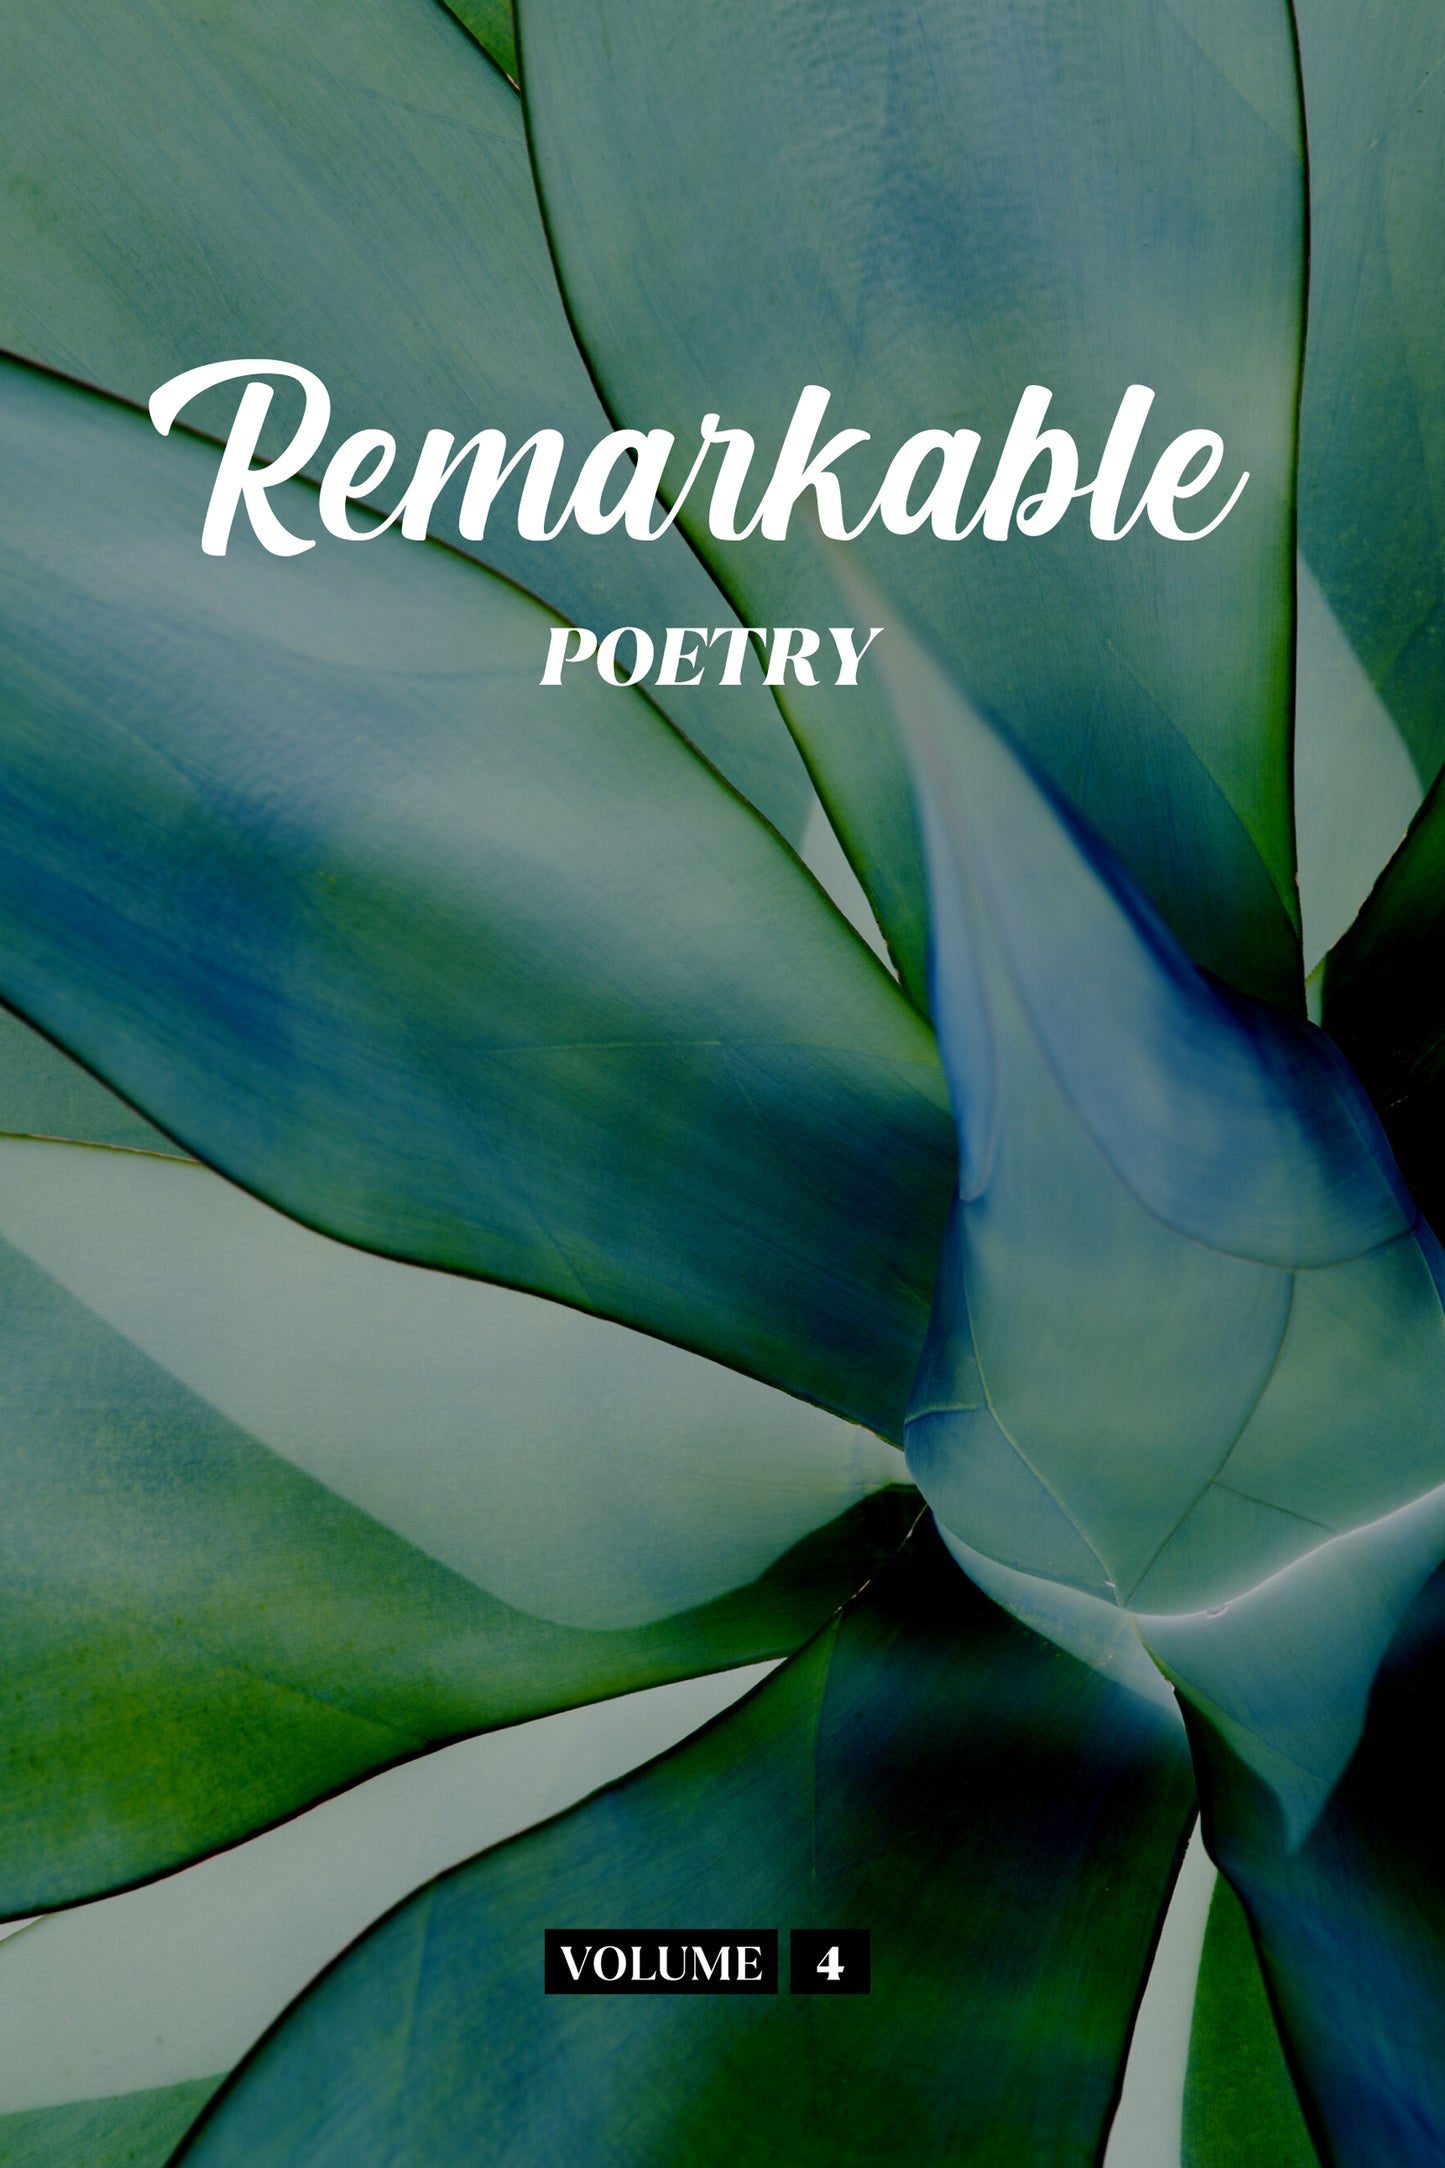 Remarkable Poetry (Volume 4) - Physical Book